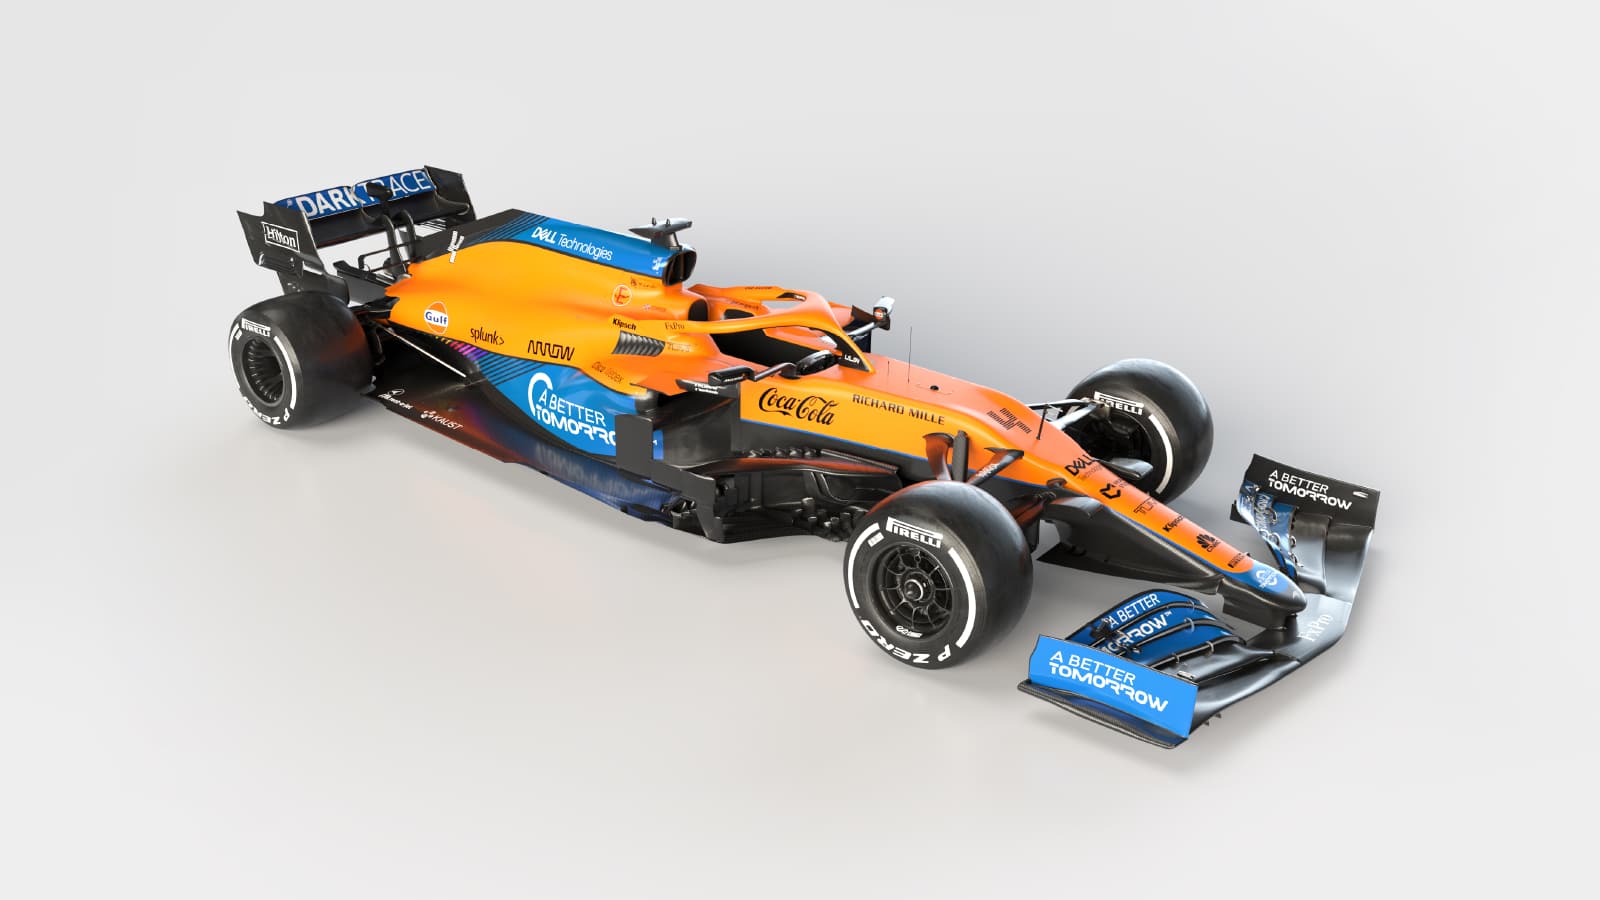 Alpine F1 reveal blue car for 2021 debut as rebranded Renault team launch  new era, F1 News